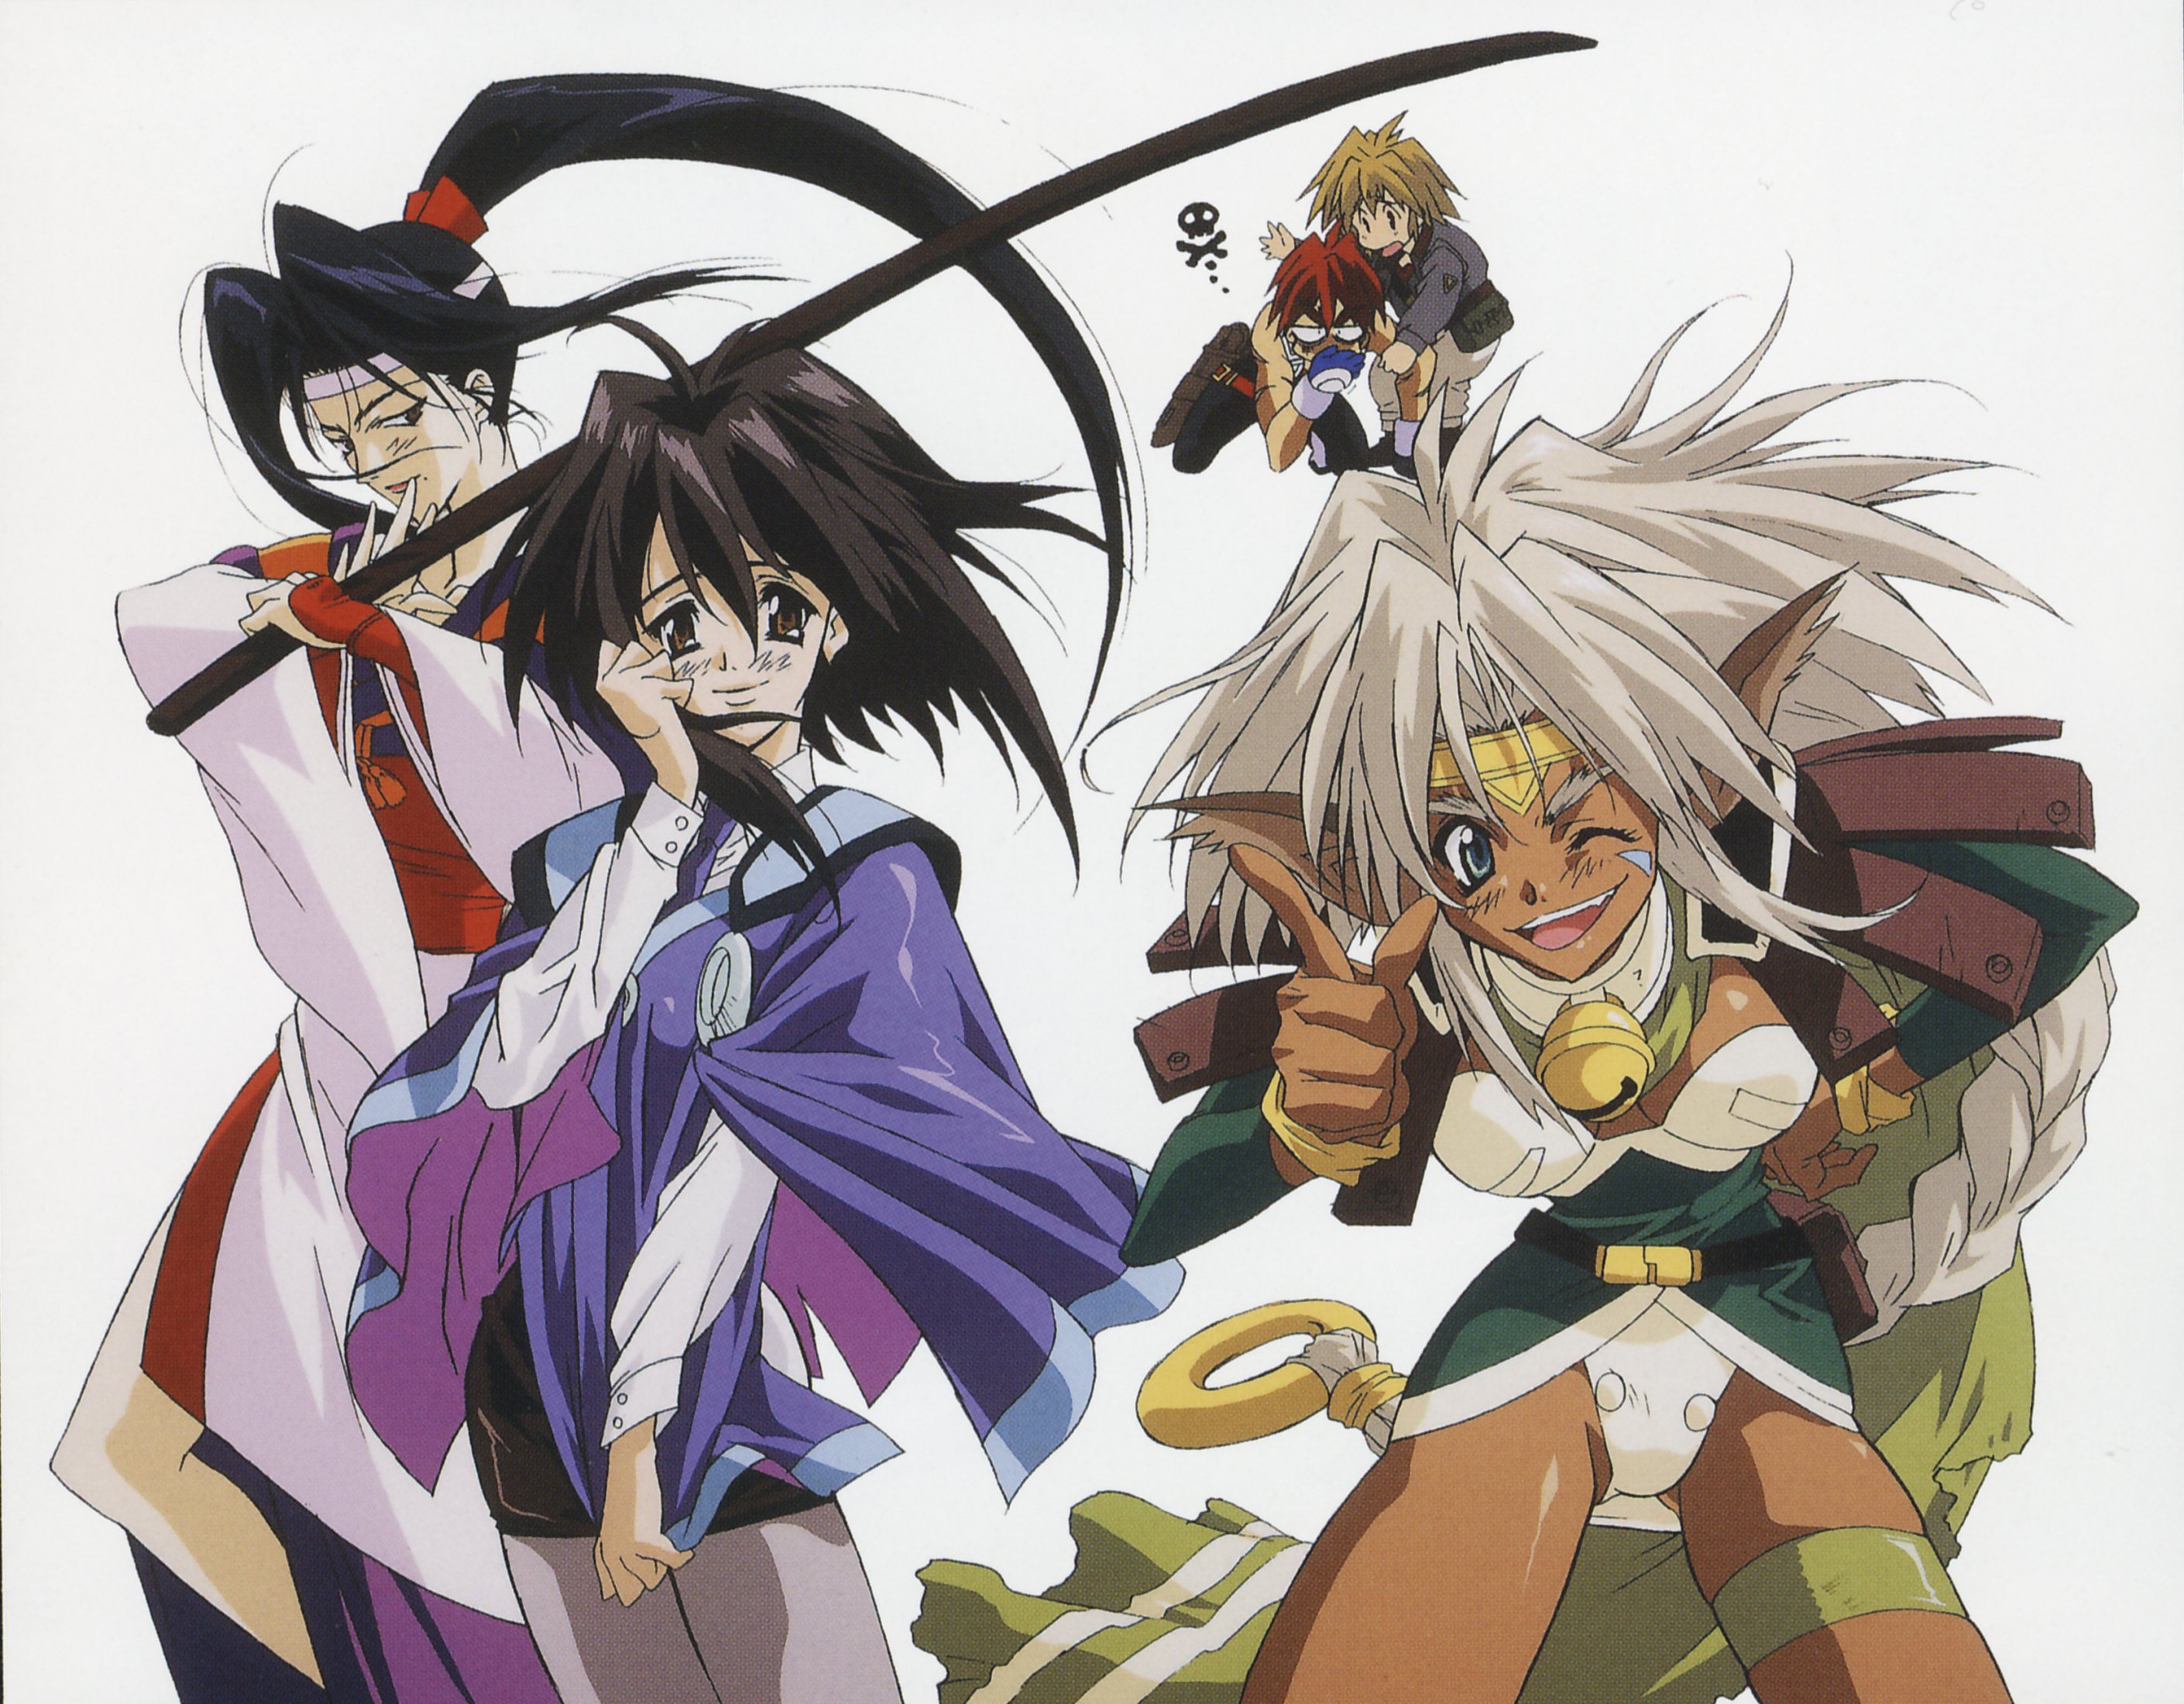 Outlaw Star Wallpapers.